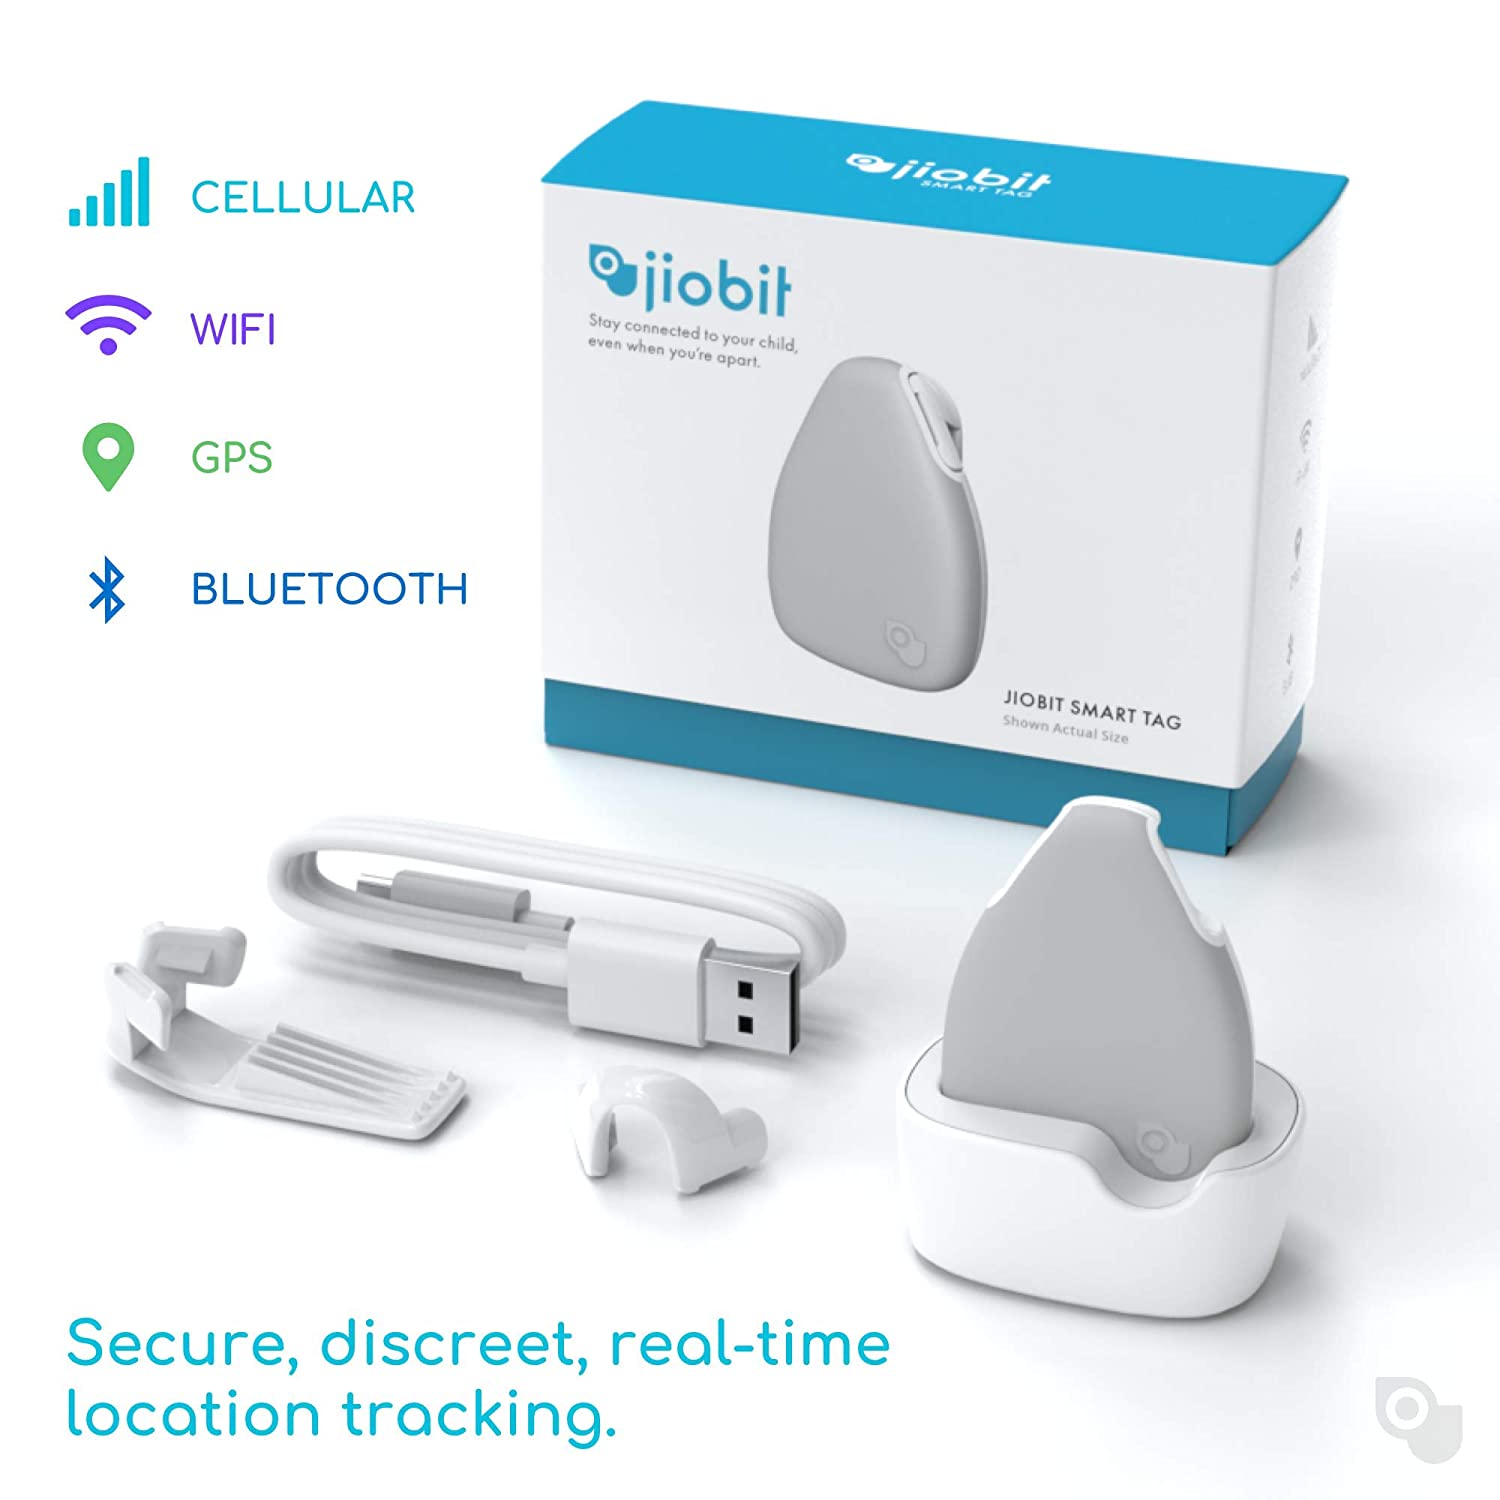 Jiobit - Smallest Real-Time Location Tracker for Kids